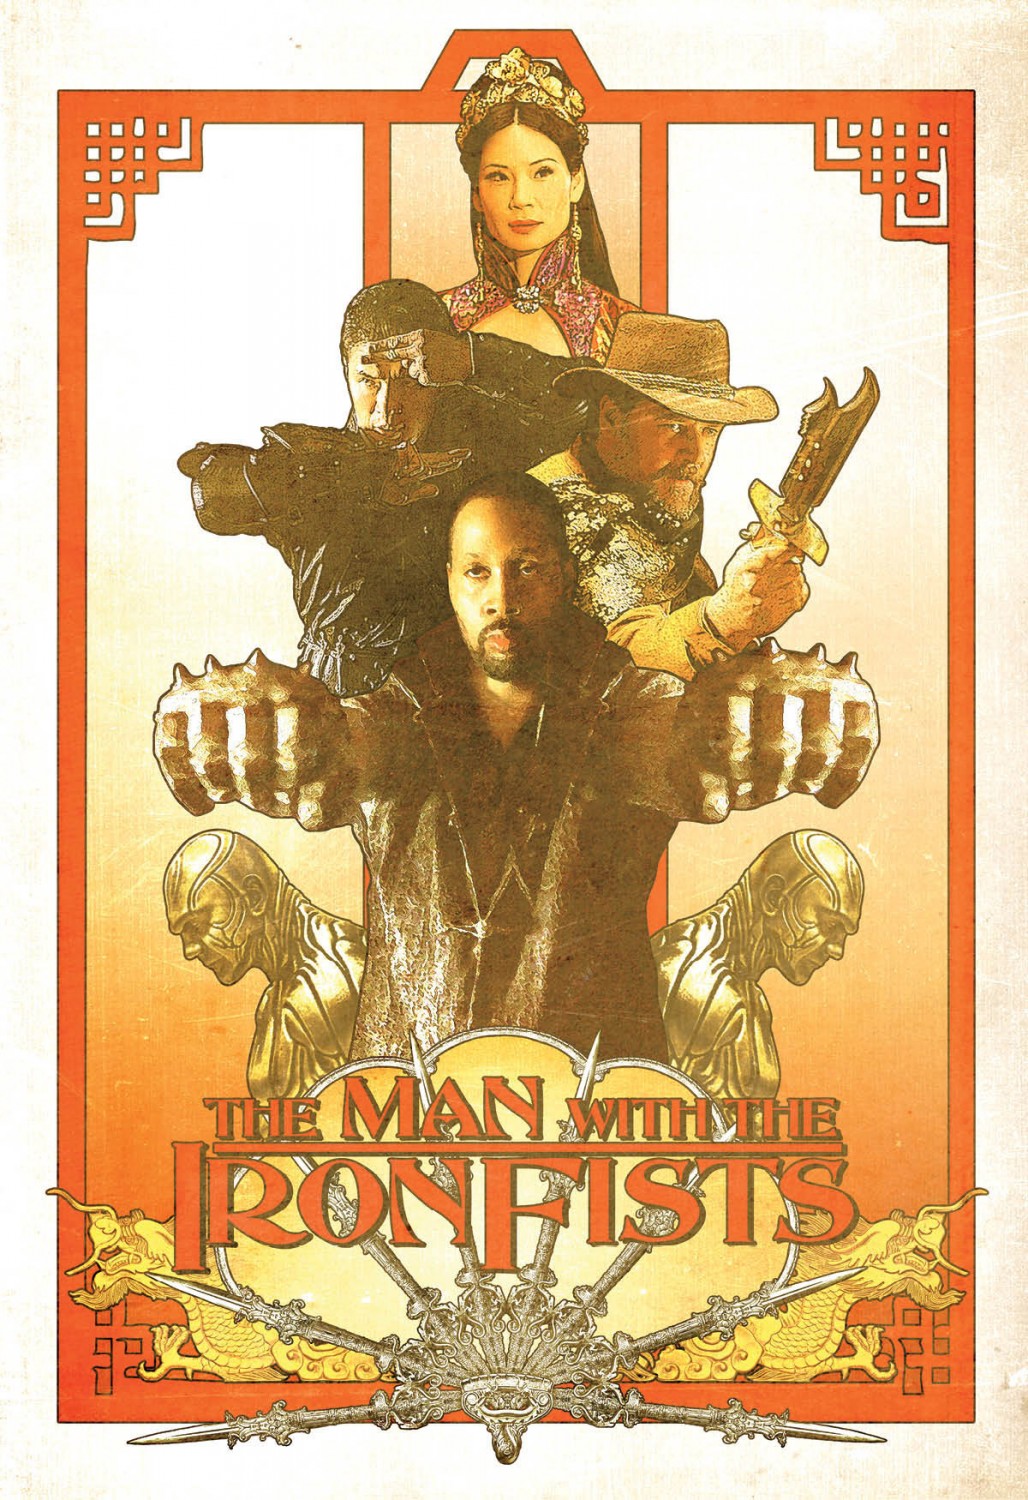 http://3.bp.blogspot.com/-s712HQsrnss/UJZYHo6j_eI/AAAAAAABGPY/JAABeZnjm0E/s1600/The_Man_with_the_Iron_Fists-RZA-Russell_Crowe-Lucy_Liu-Jamie_Chung-Poster.jpg